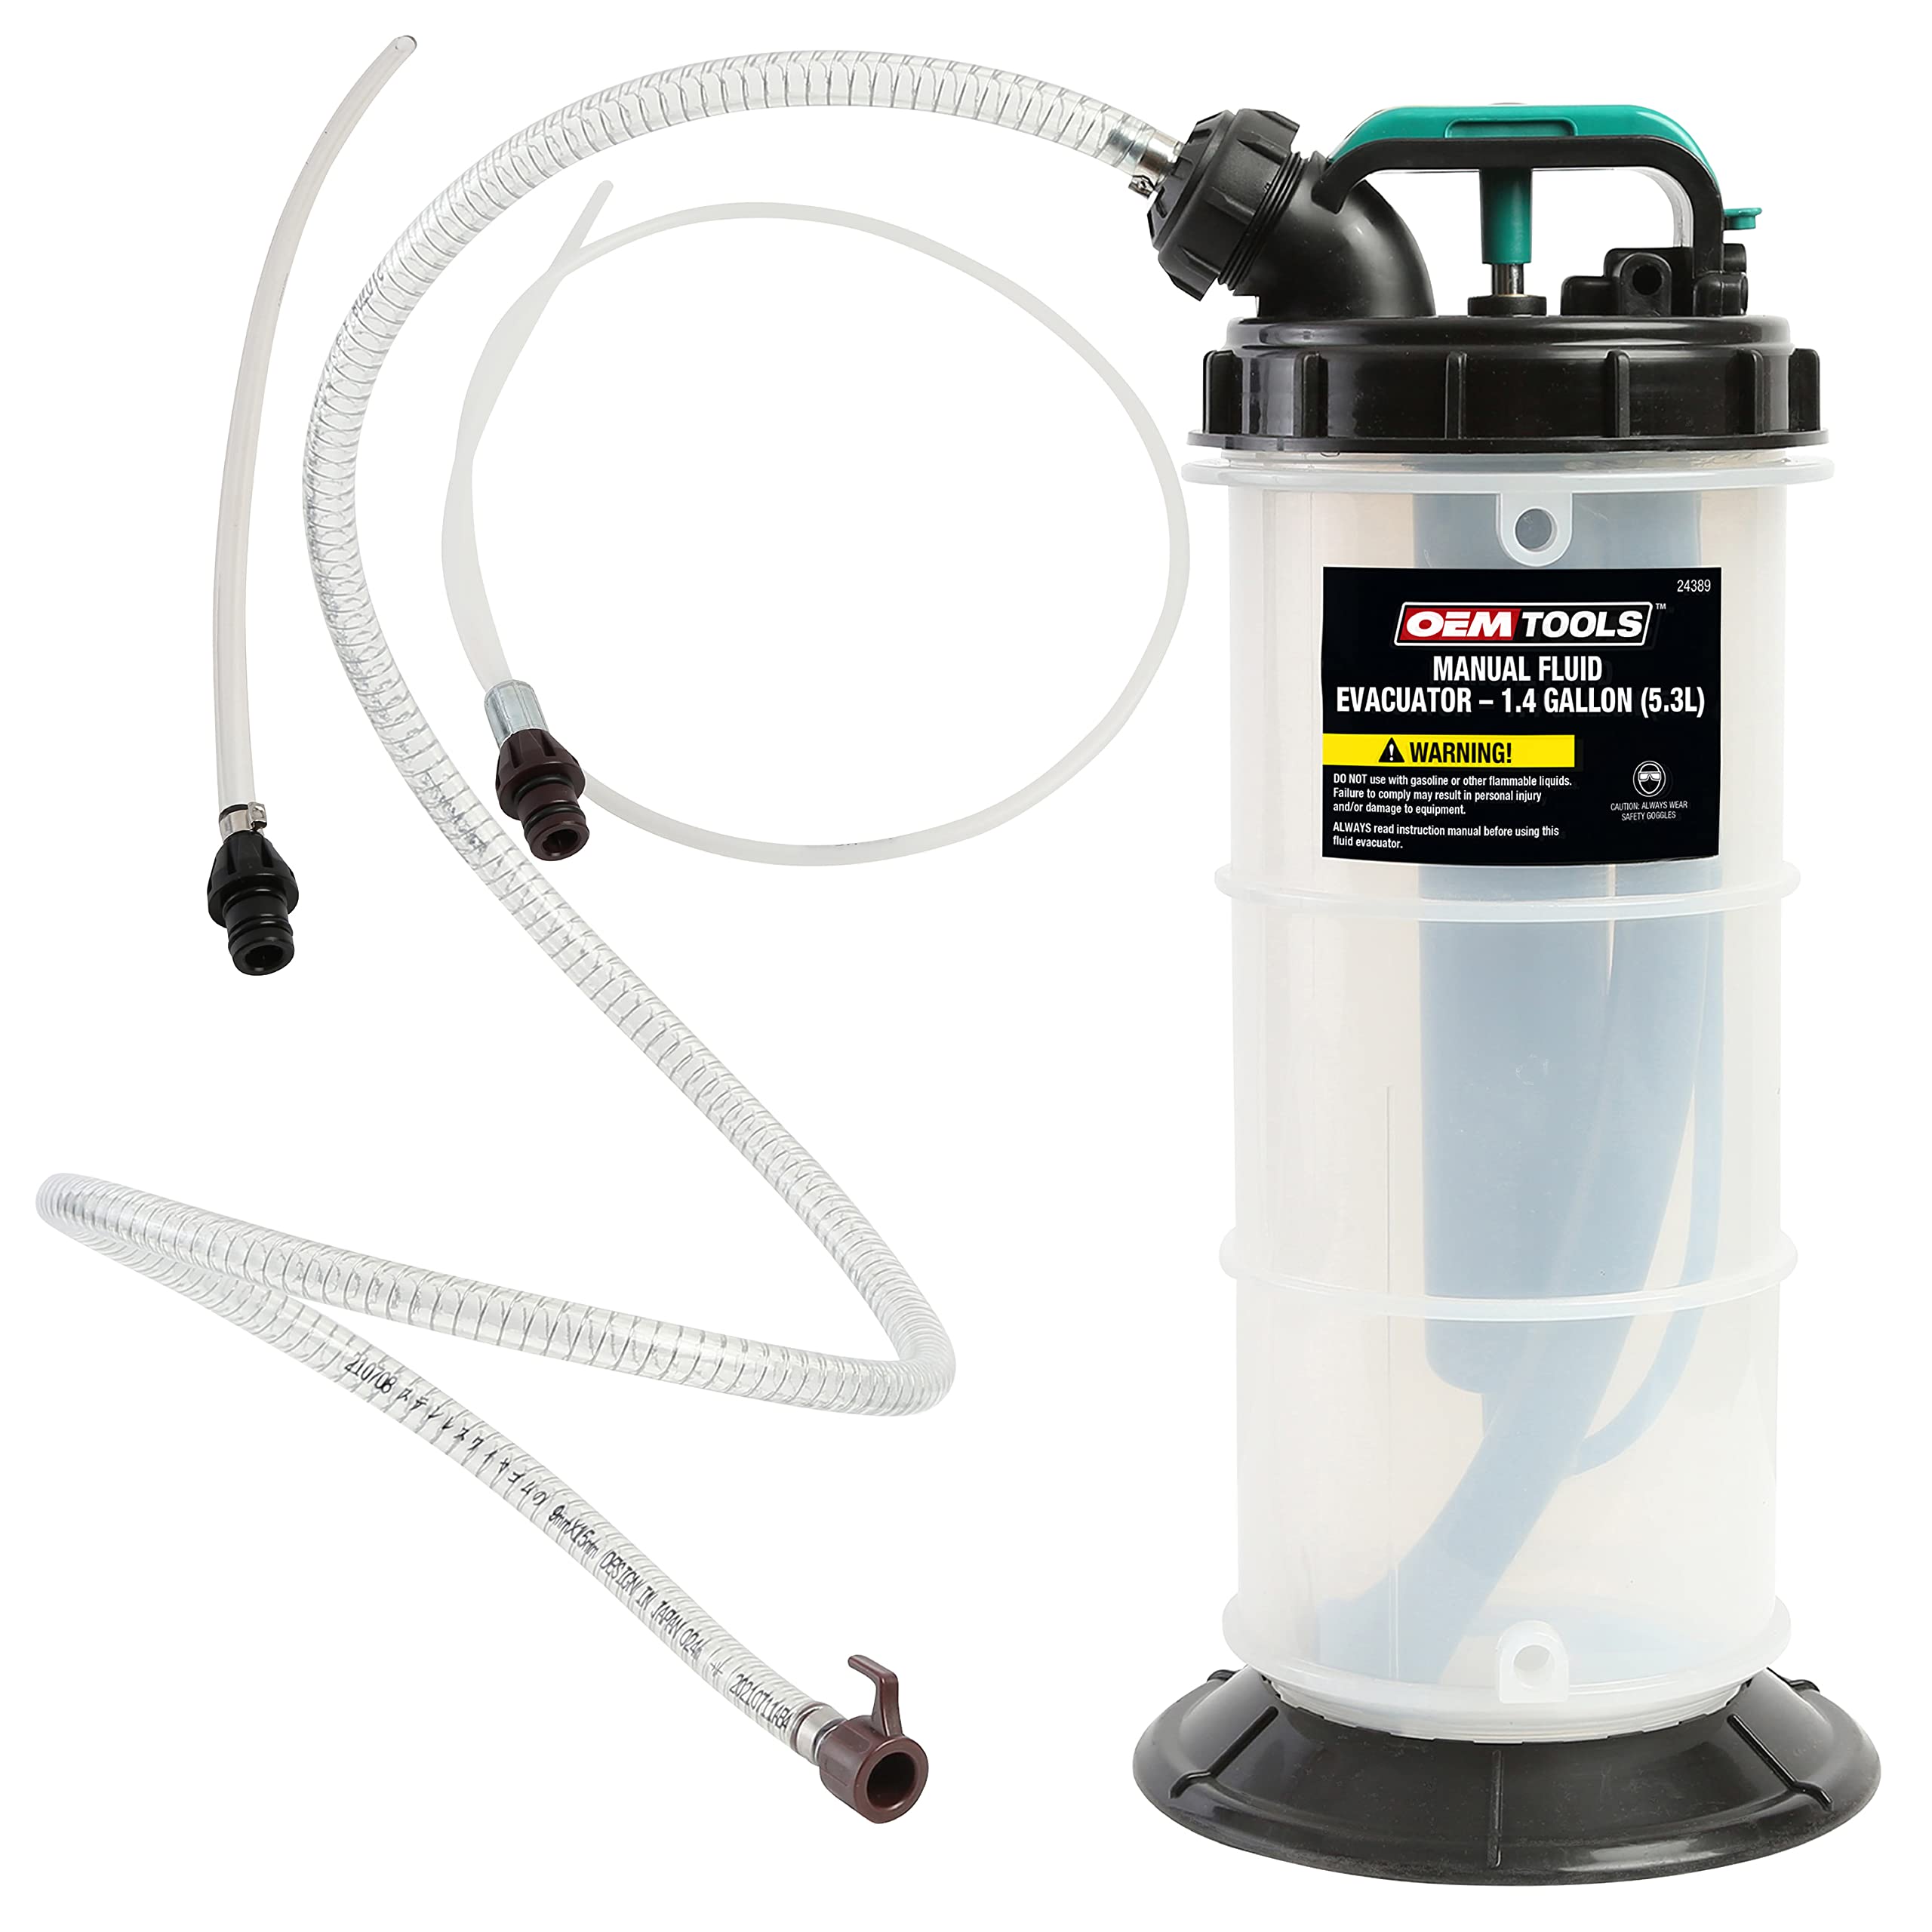 OEMTOOLS 24389 5.6 Quarts (1.4 Gallons) Manual Fluid Extractor, Fluid Extractor Pump, Oil Extractor Vacuum, Auto Oil Extractor